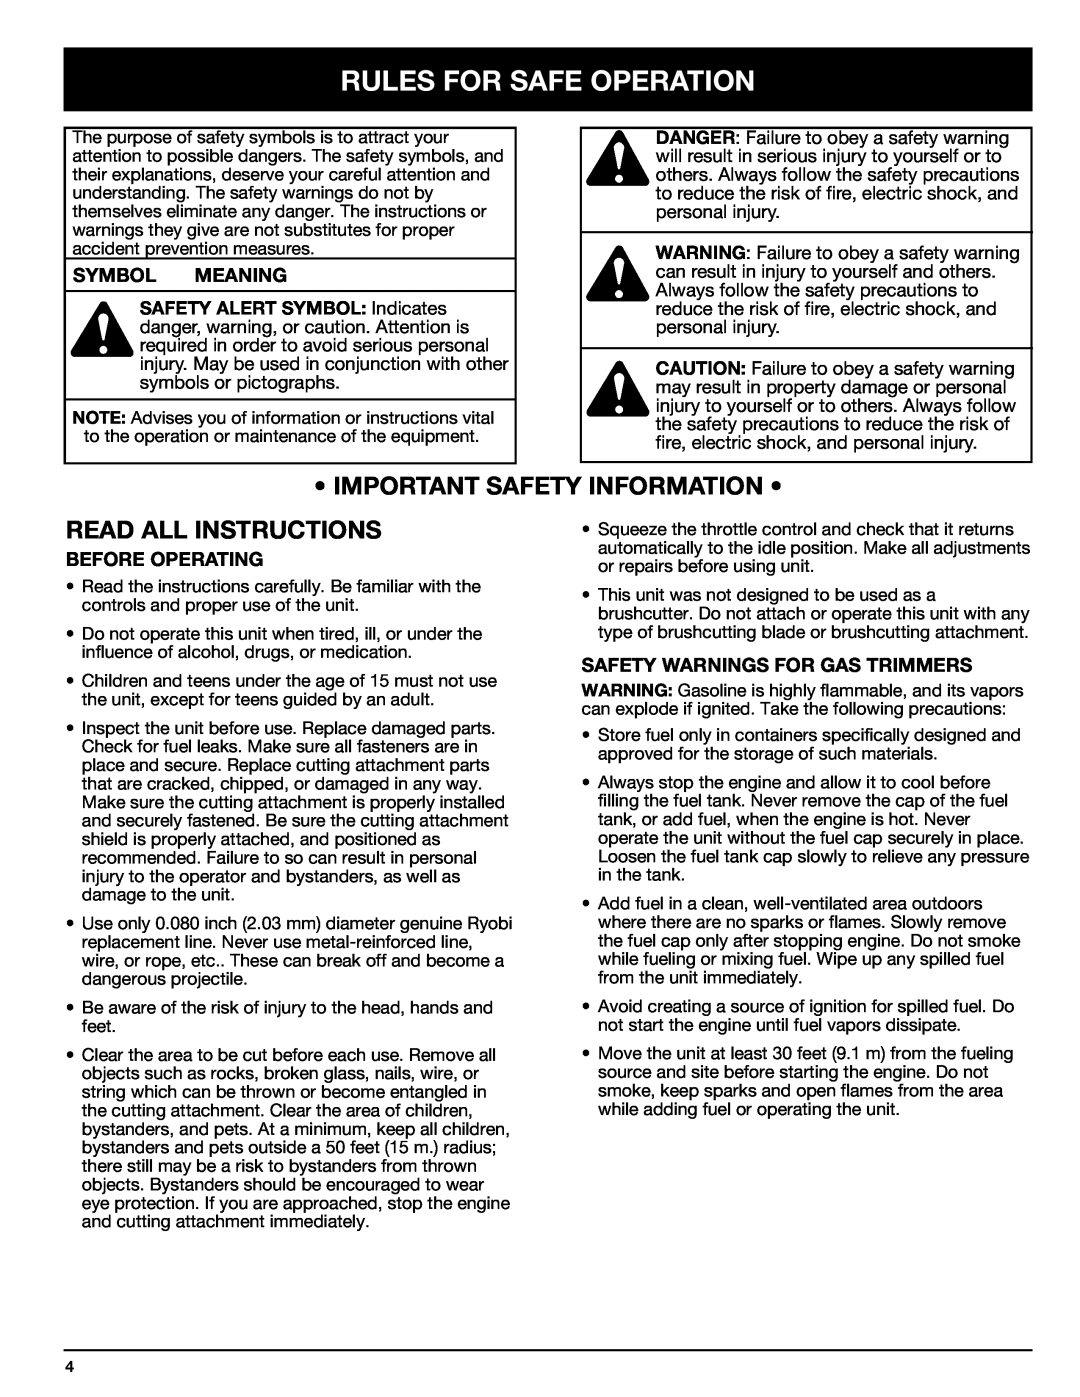 Ryobi Outdoor 875r manual Rules For Safe Operation, Important Safety Information, Read All Instructions, Symbol Meaning 